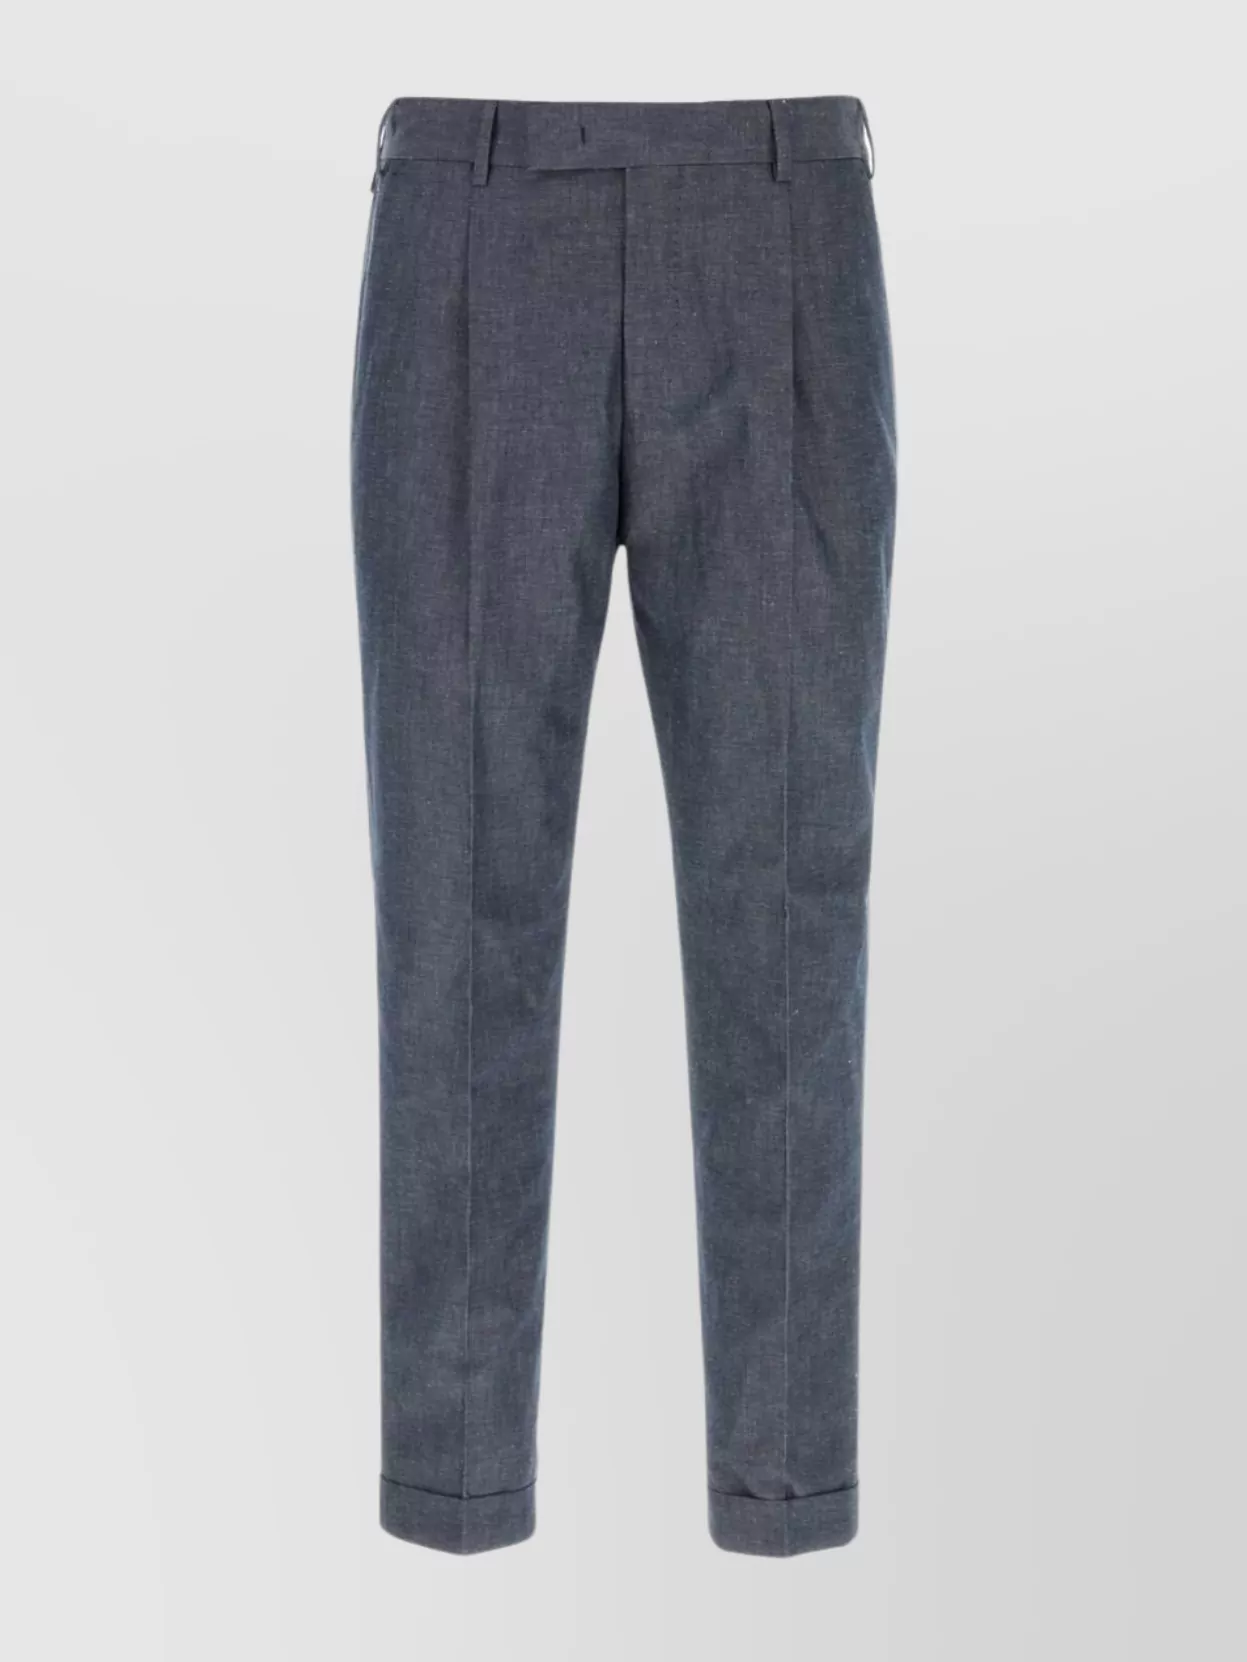 Pt Torino Pant Pleated Front Stretch Cotton In Gray